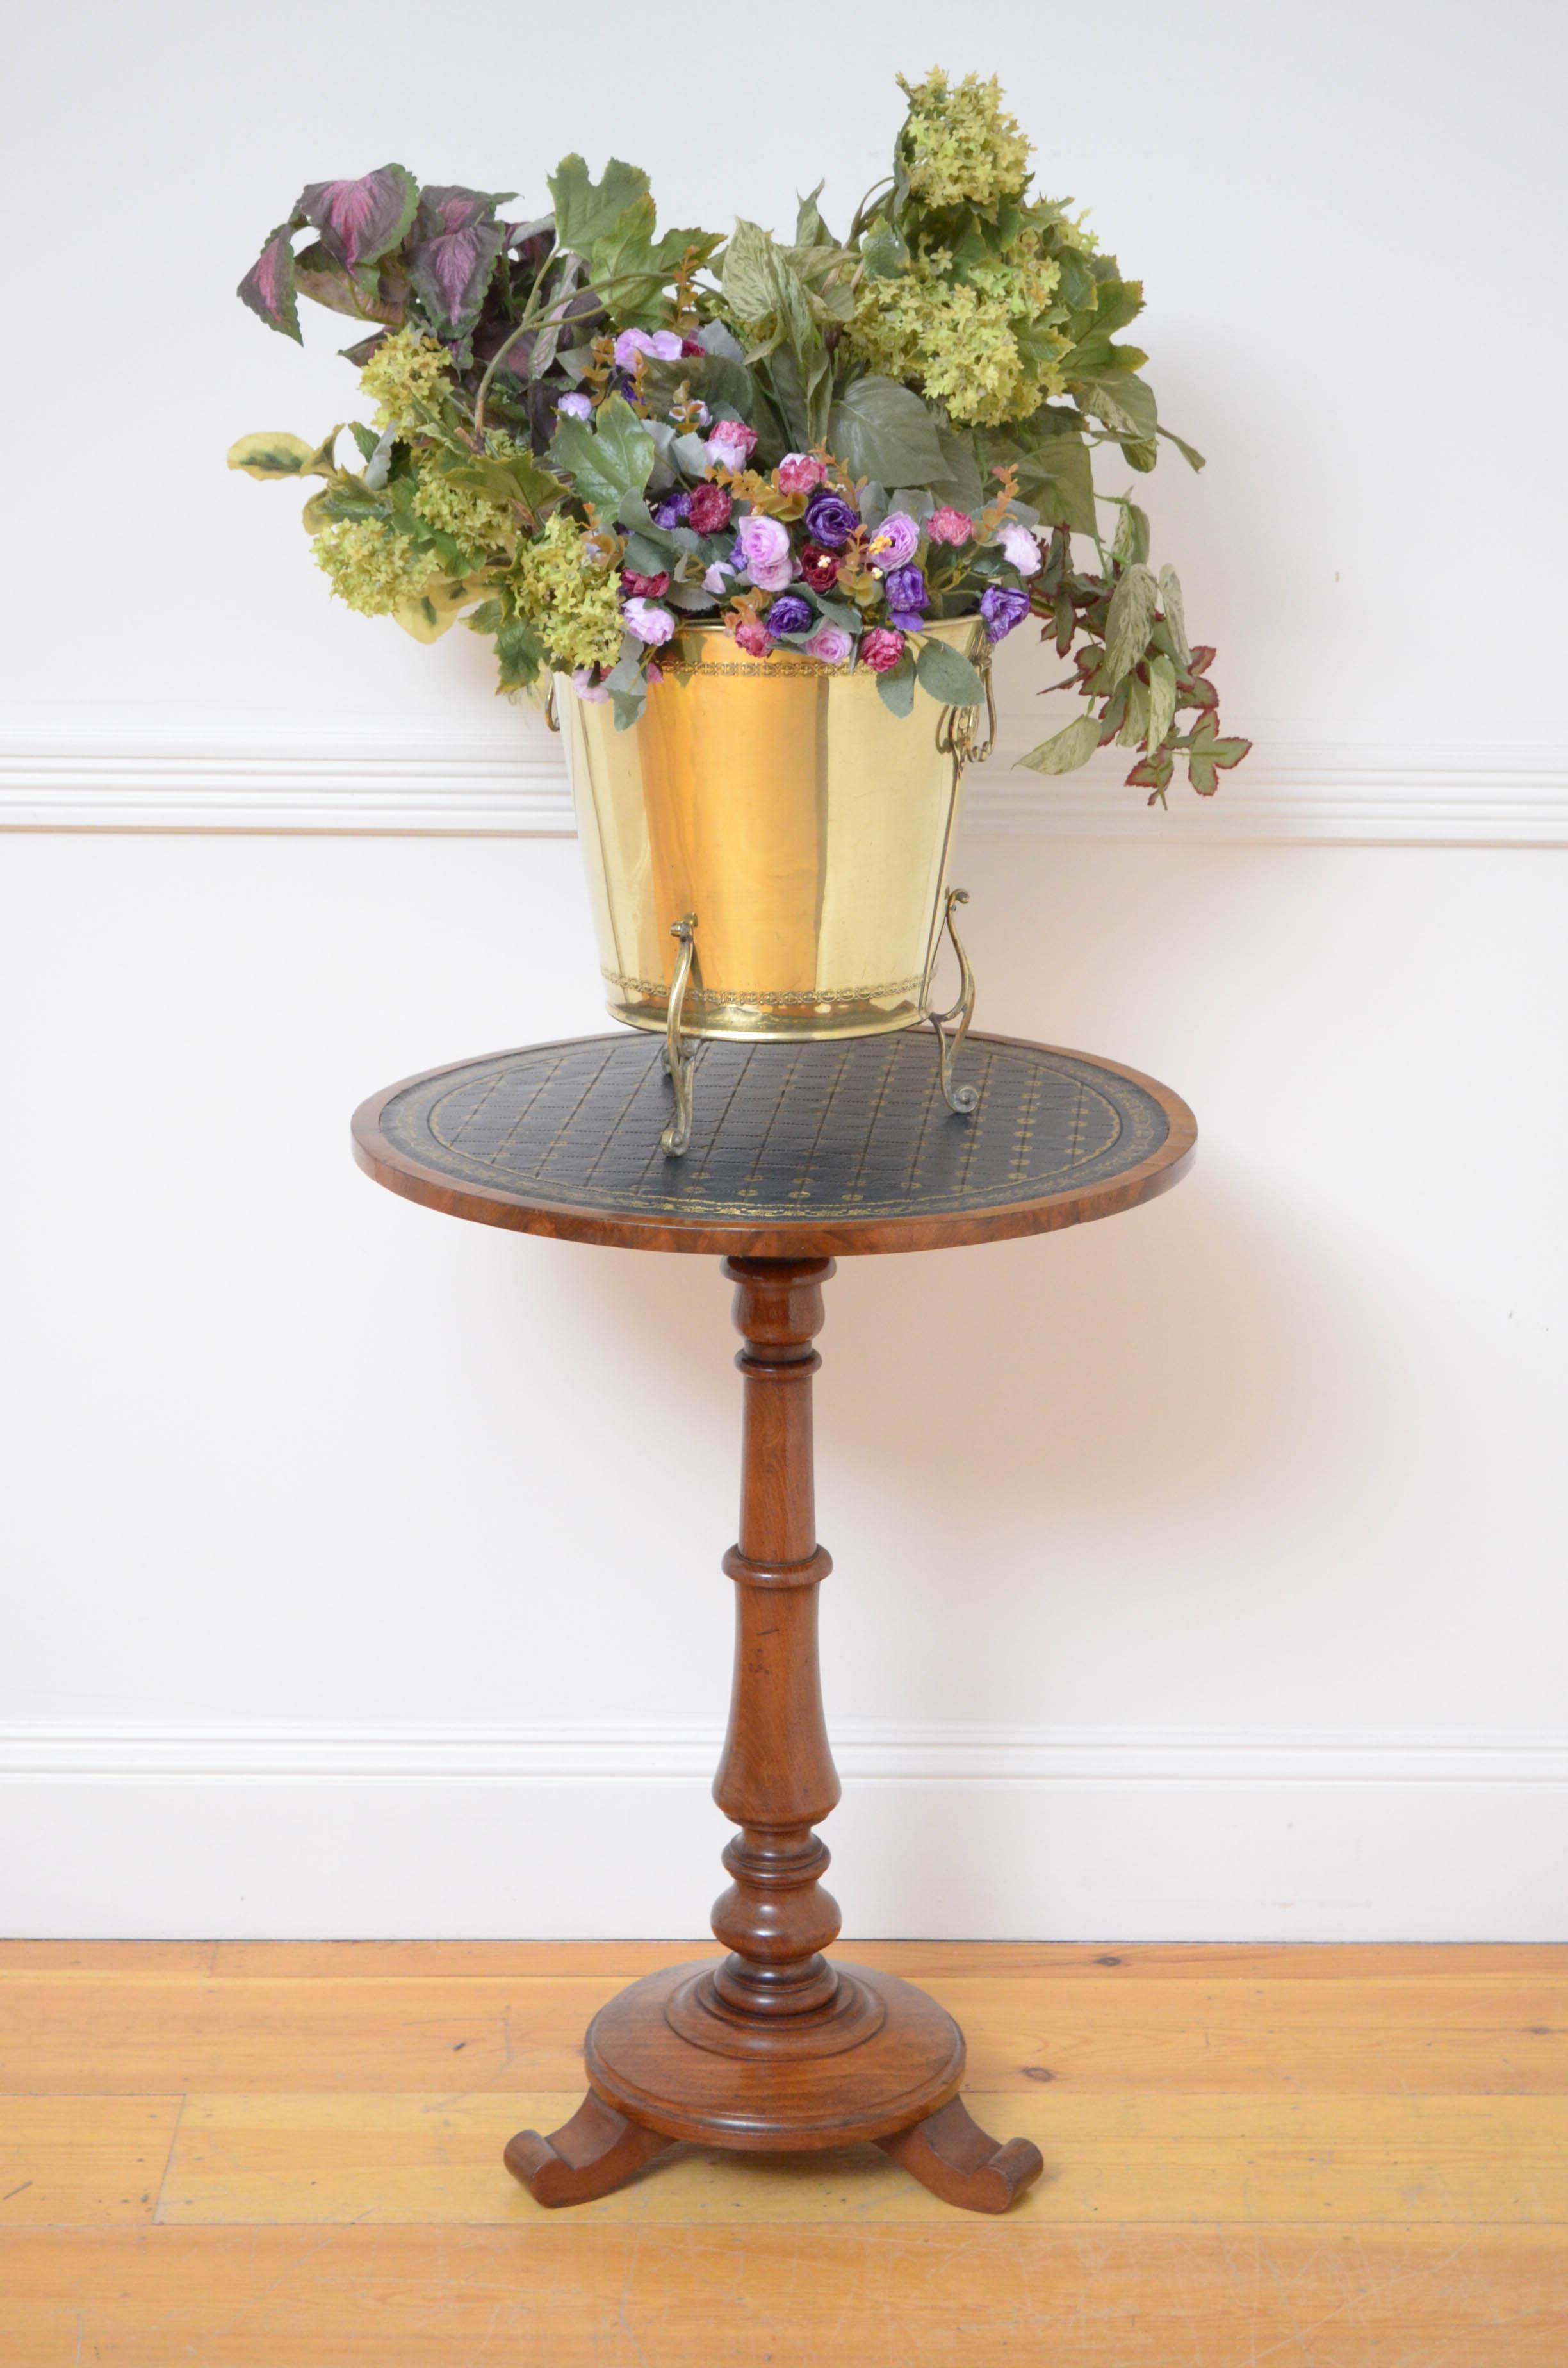 K0 Edwardian brass coal bucket or planter, having original lift up lid with beaded edge enclosing original removable liner, all fitted with shaped carrying handles and 3 cabriole legs. This antique coal bin has been cleaned and polished and is ready